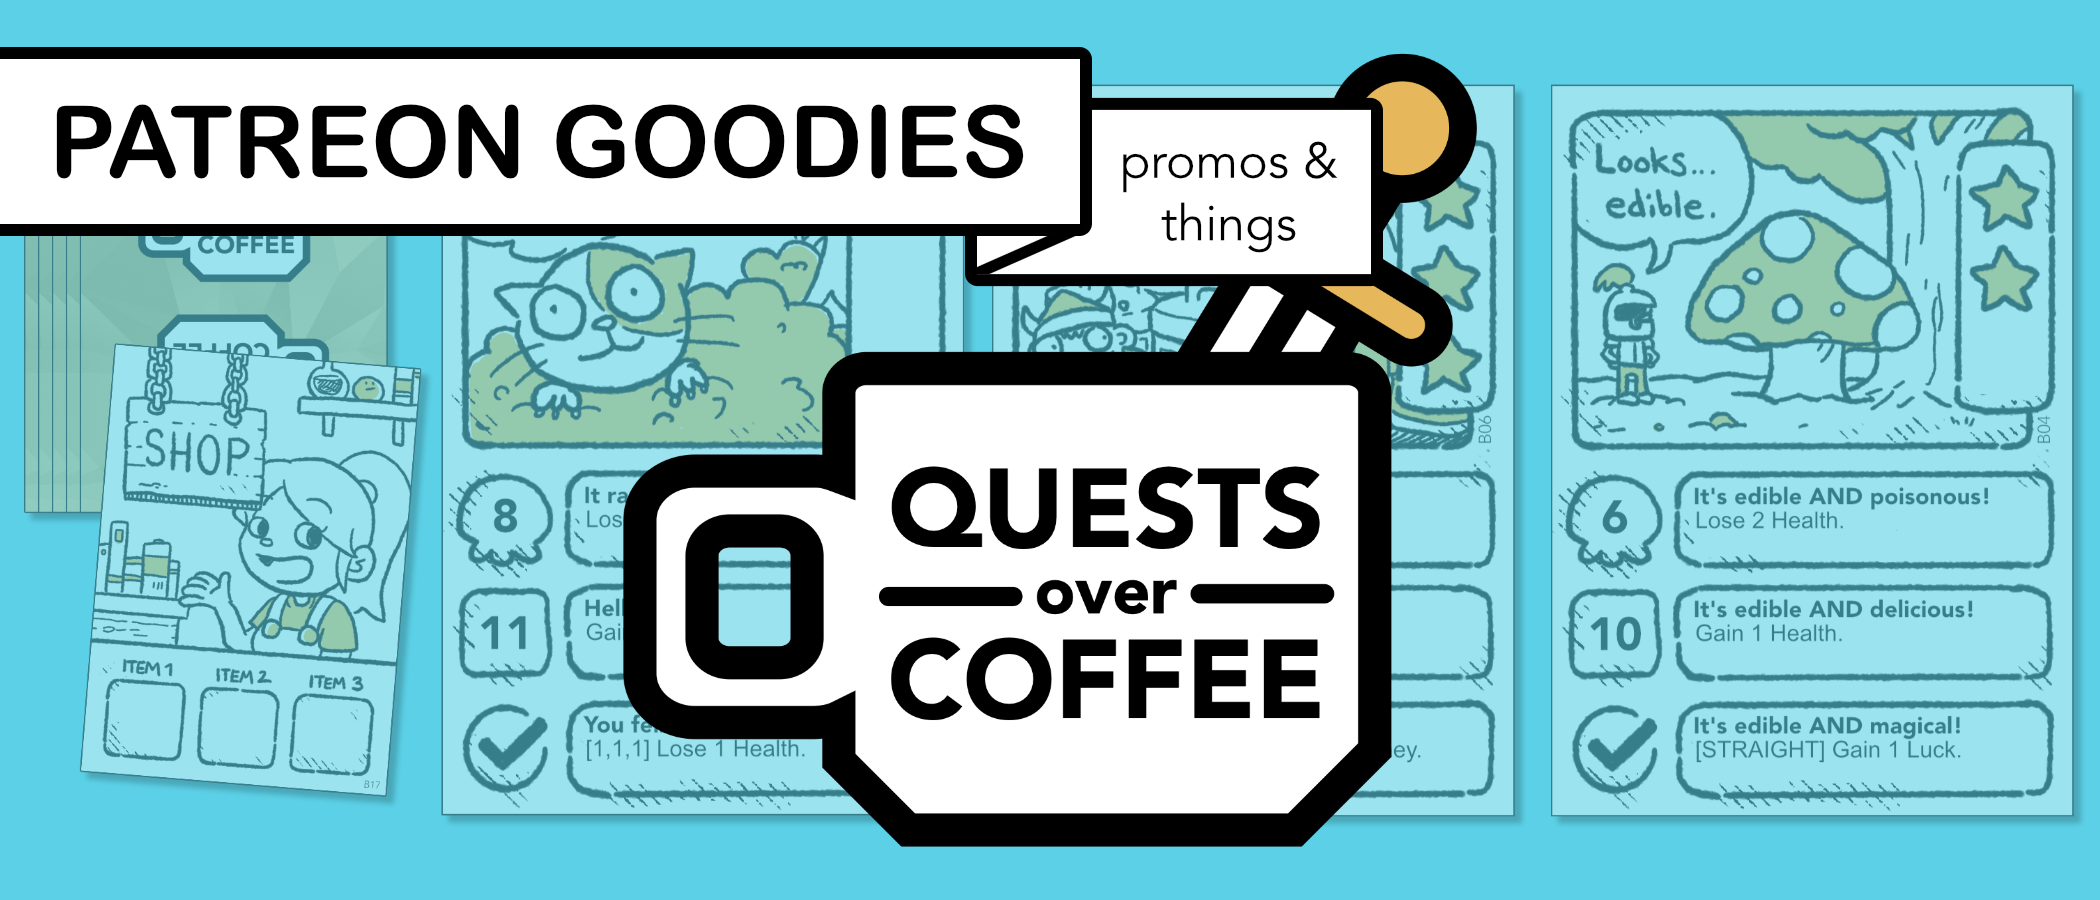 Quests Over Coffee: Patreon Goodies